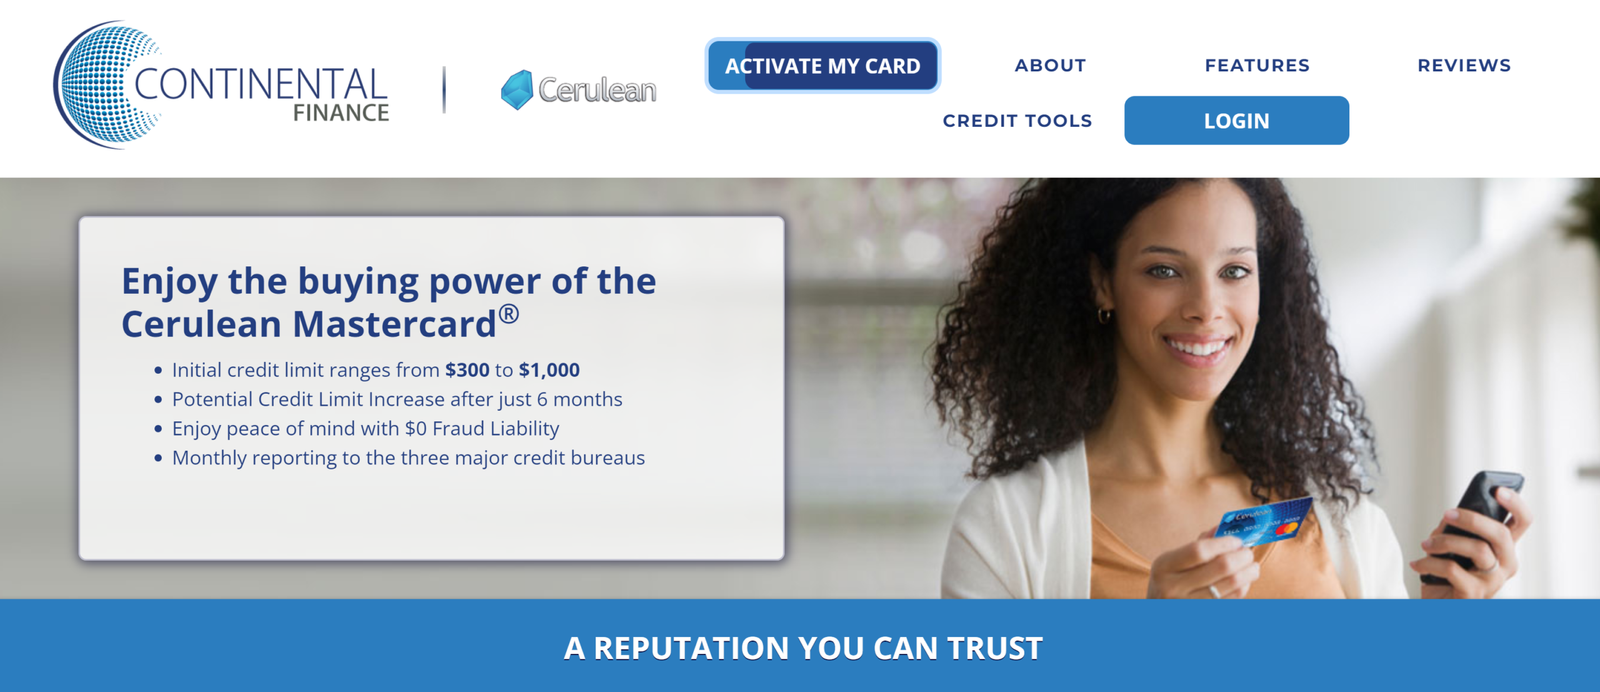 www.yourceruleancard.com – Apply for Cerulean Mastercard Online